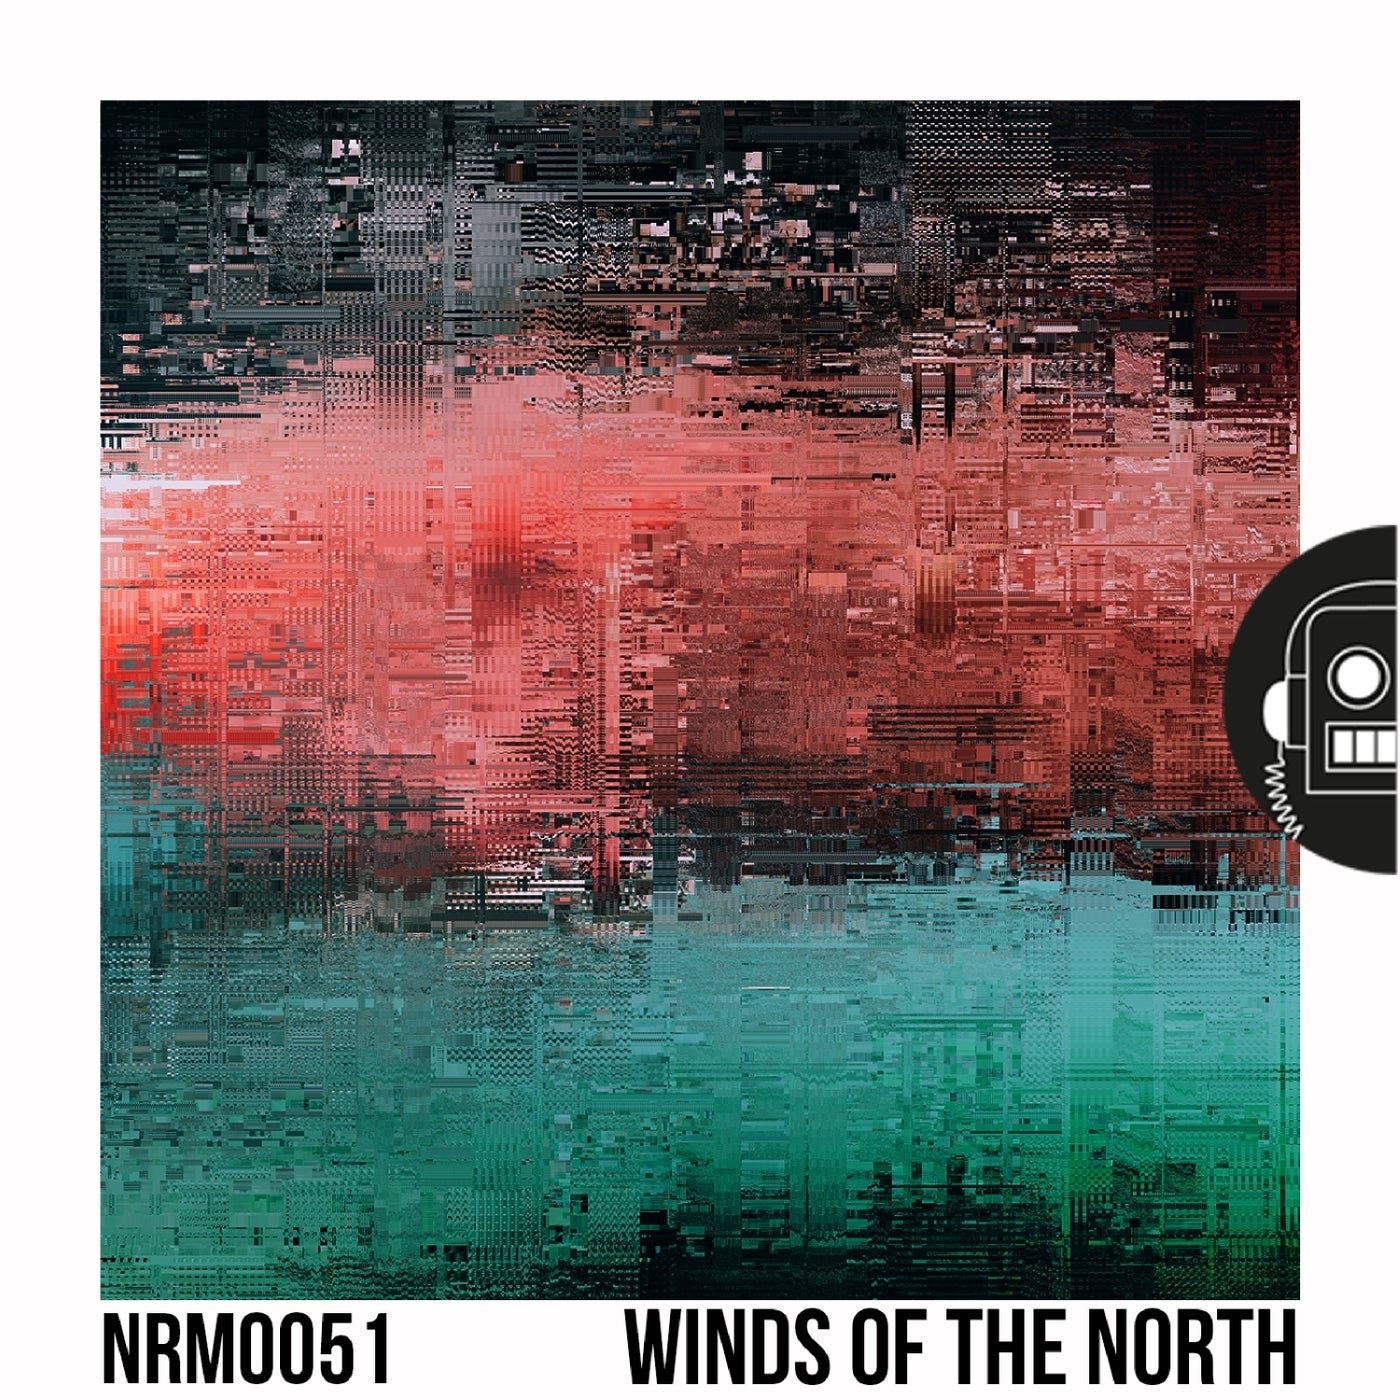 Winds of the North